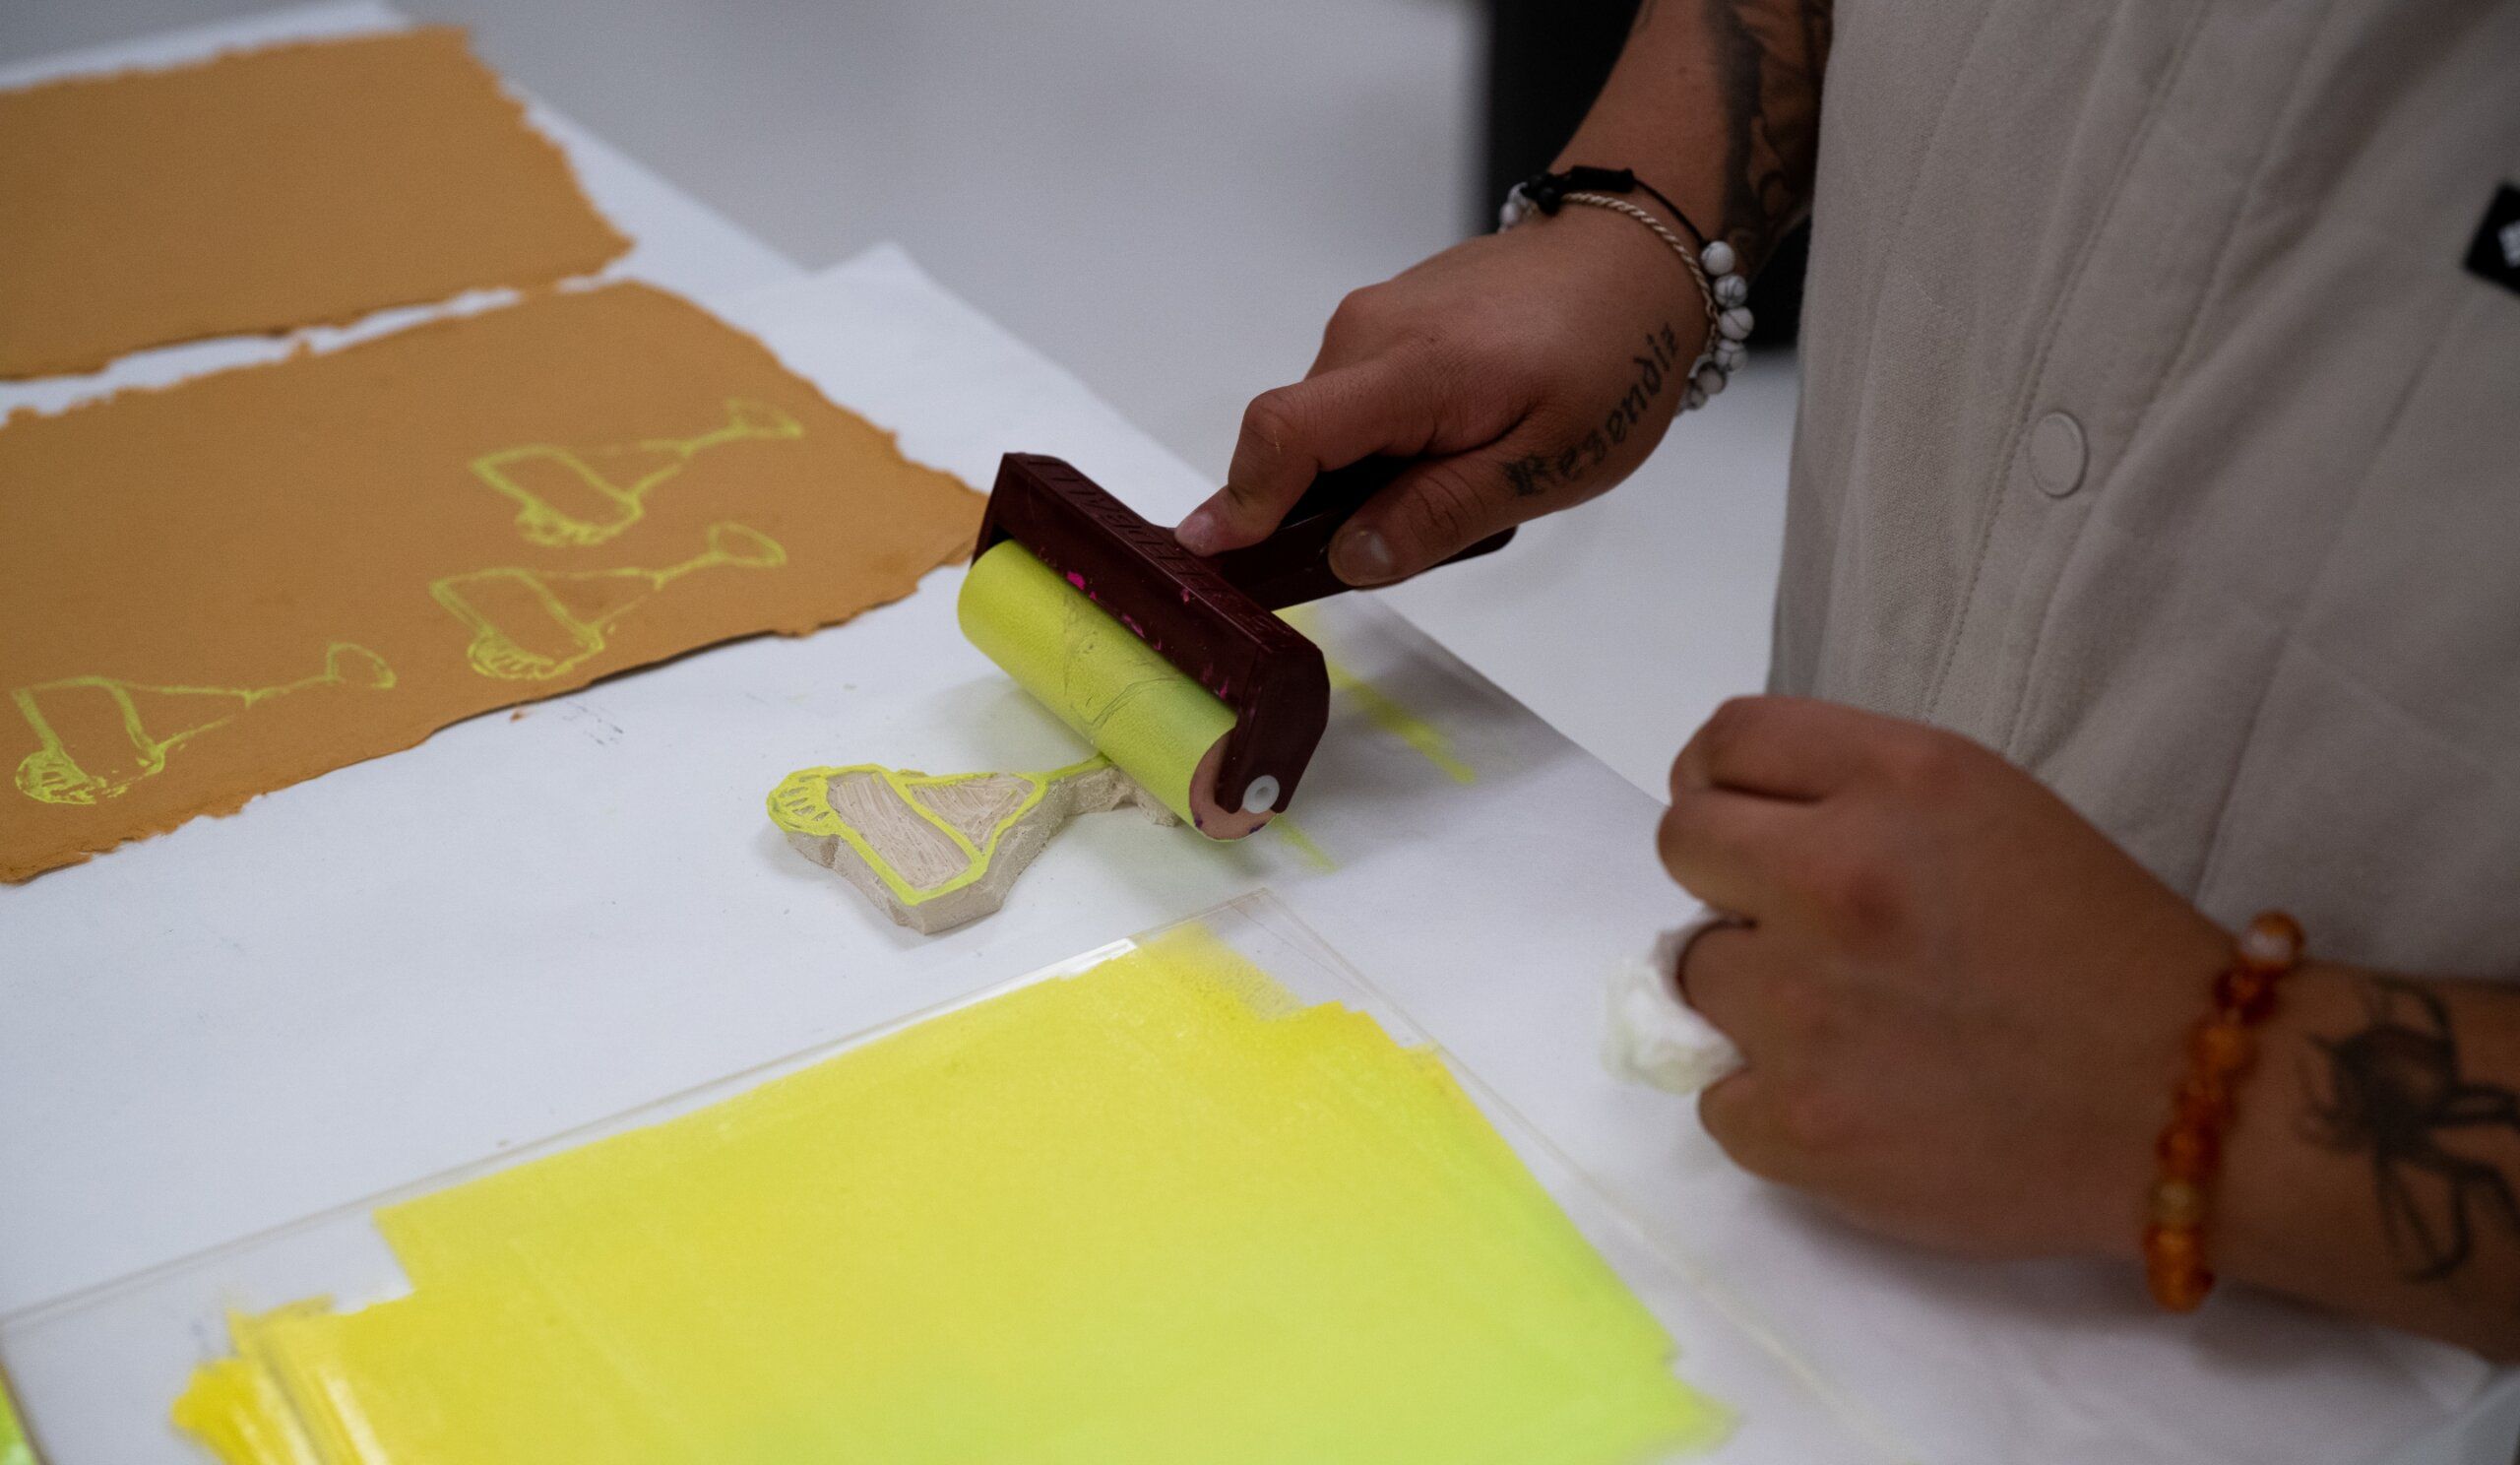 A person using a yellow paint brush on paper.